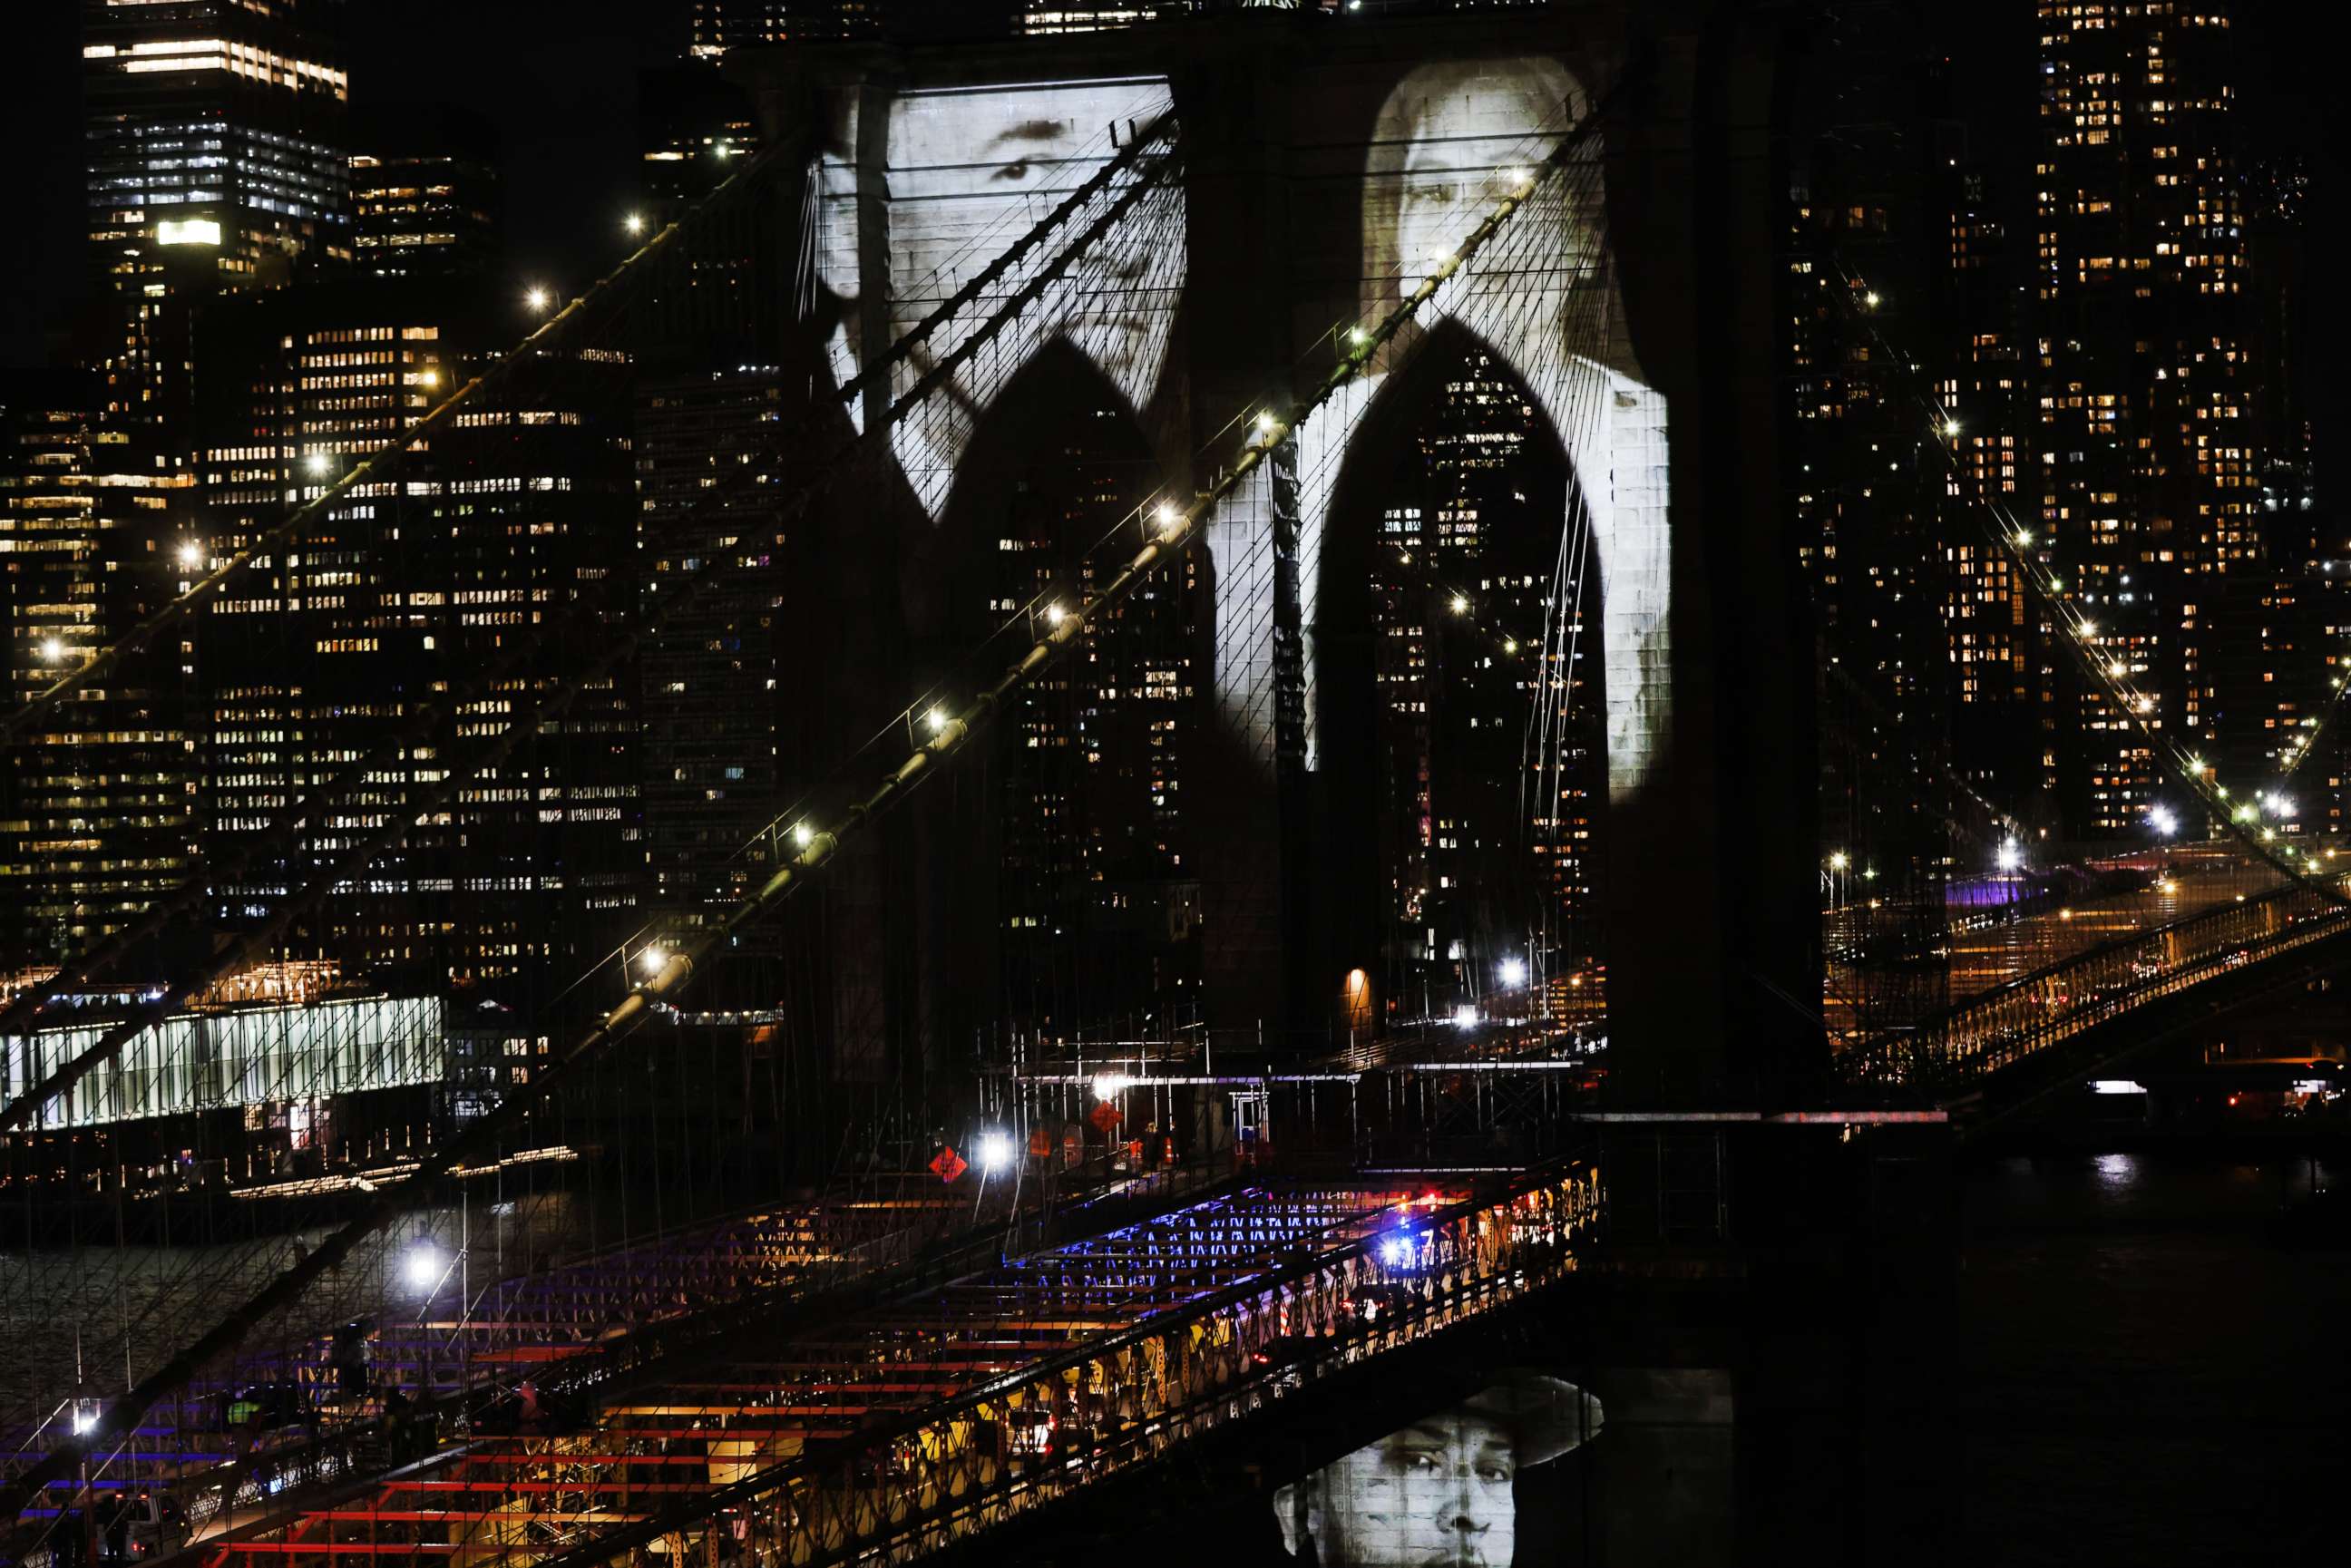 PHOTO: Faces of victims of COVID-19 are projected onto the Brooklyn Bridge during a memorial service called "A COVID-19 Day of Remembrance" on March 14, 2021 in New York City.